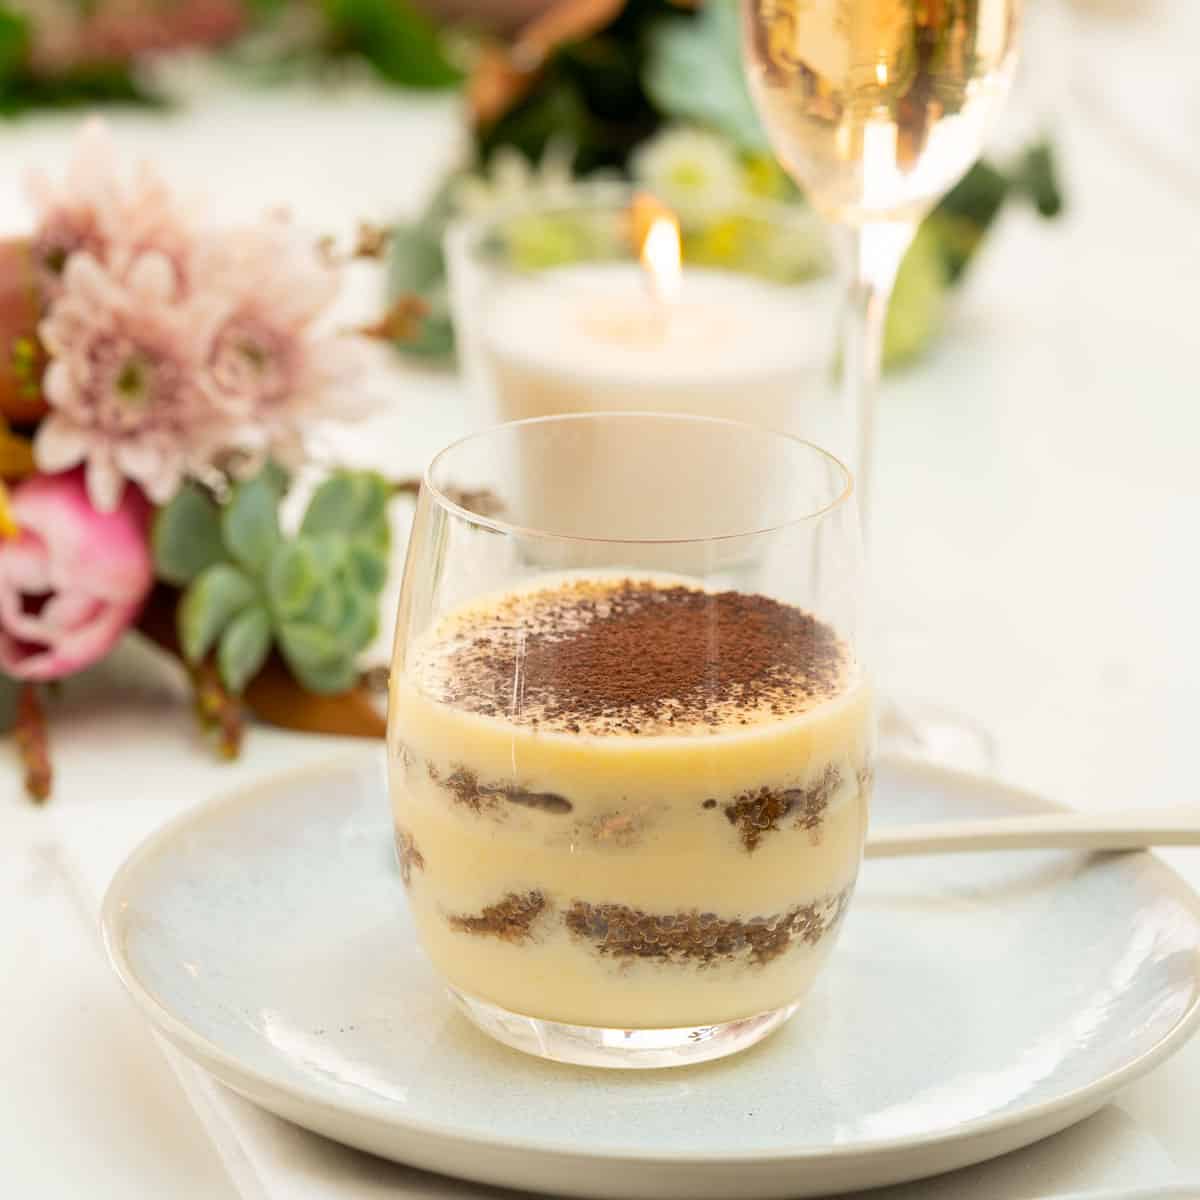 Tiramisu served in a glass, a candle, and flowers in the background.